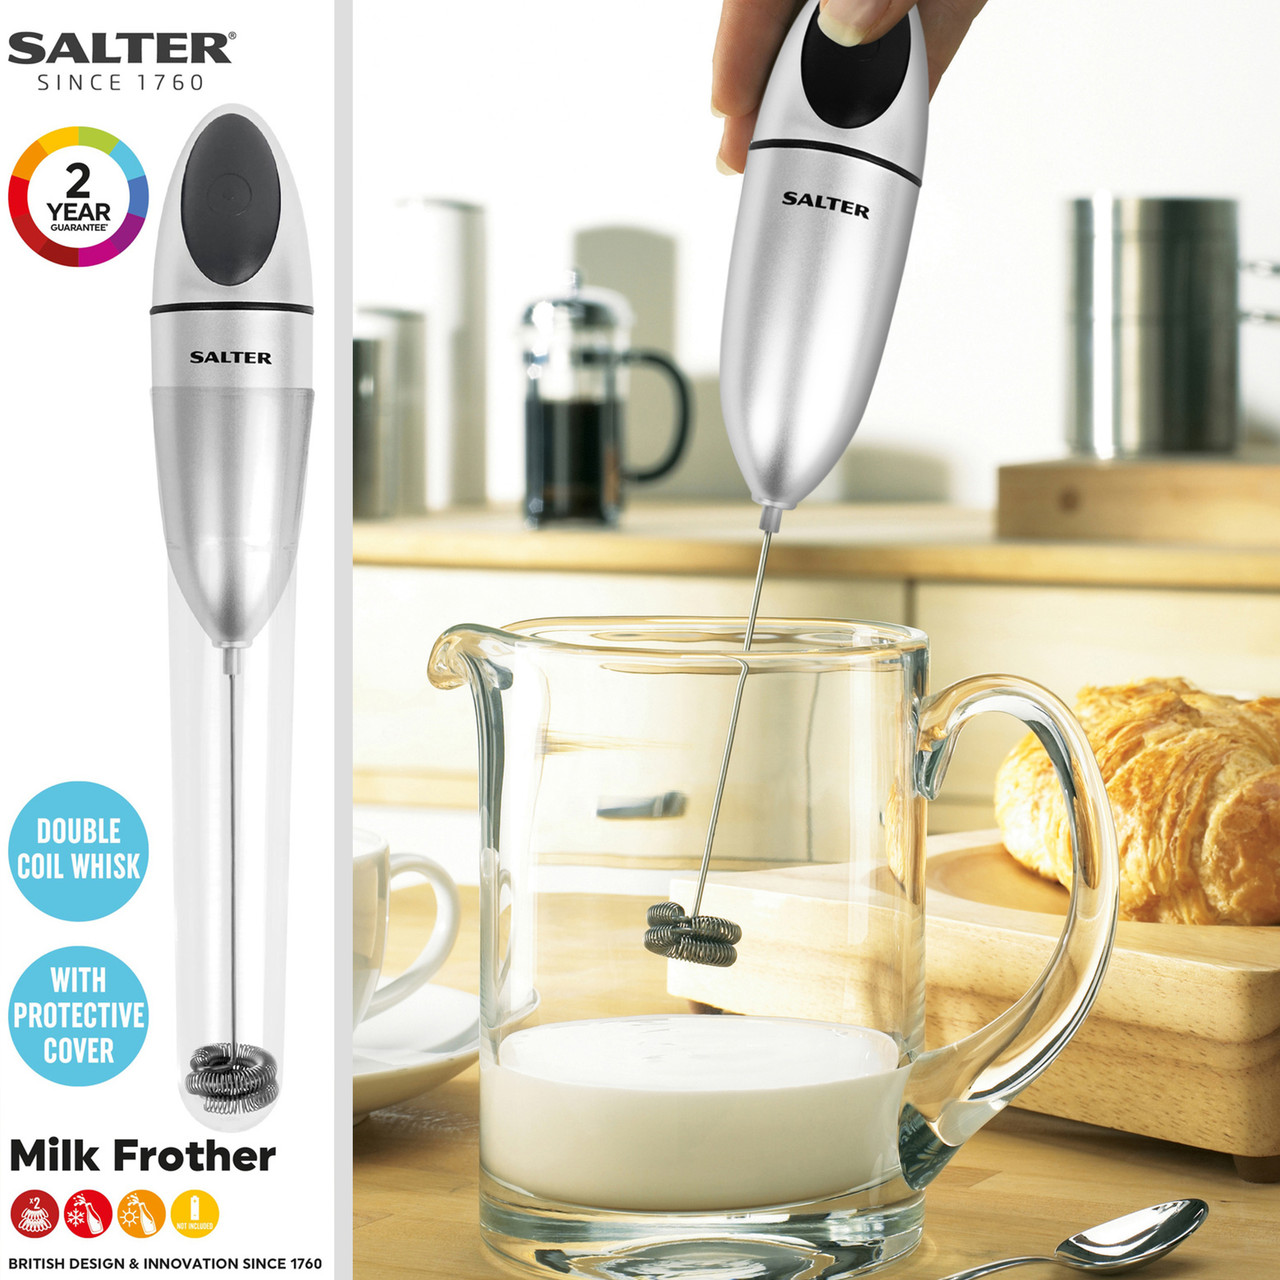 Salter Handheld Milk Frothing Whisk, Double Coil